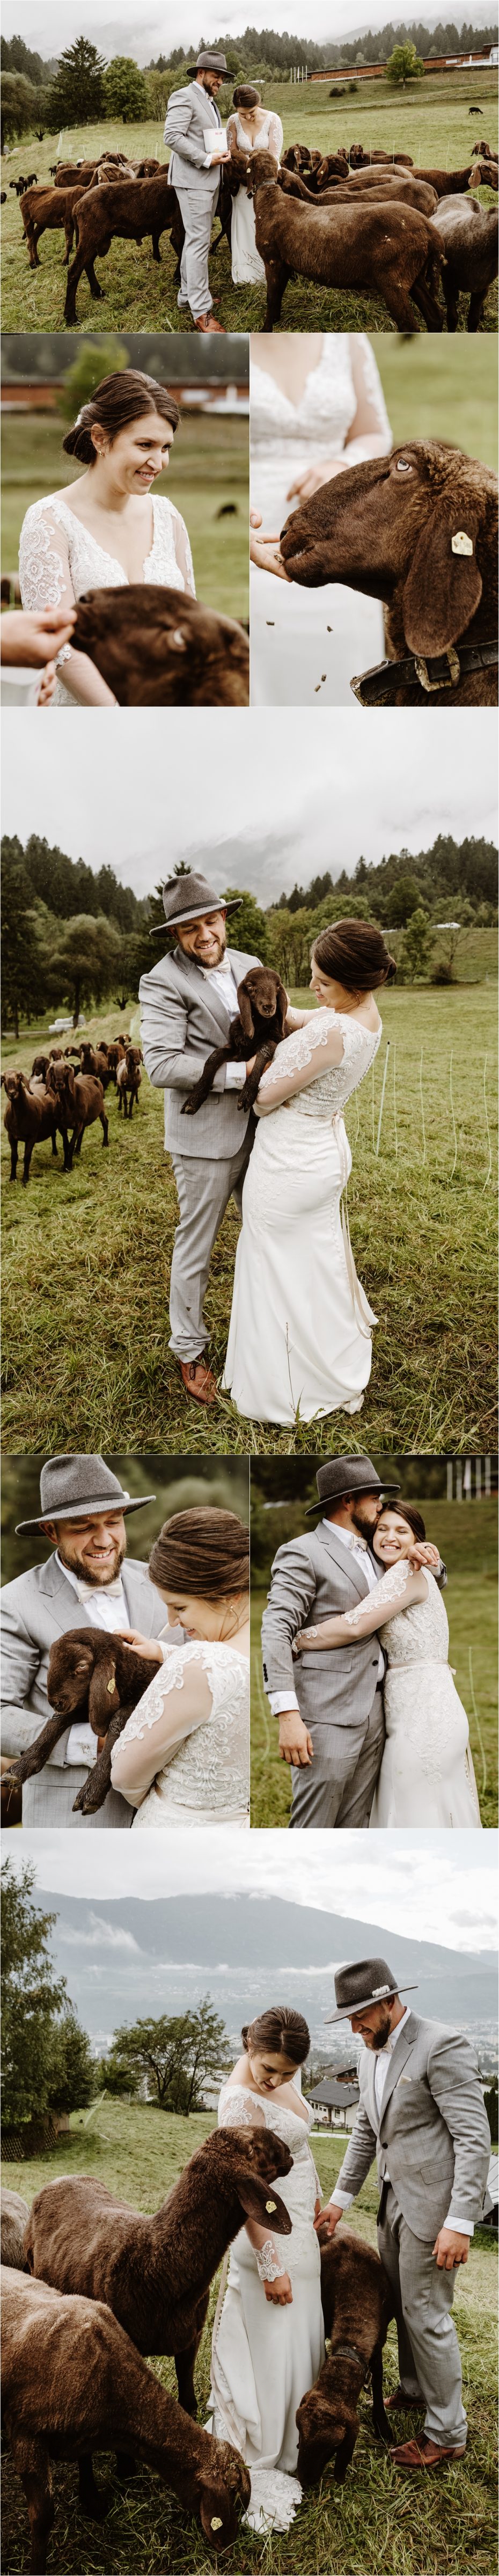 Bride and groom visit a sheep farm on their wedding day in Austria. Photos by Wild Connections Photography